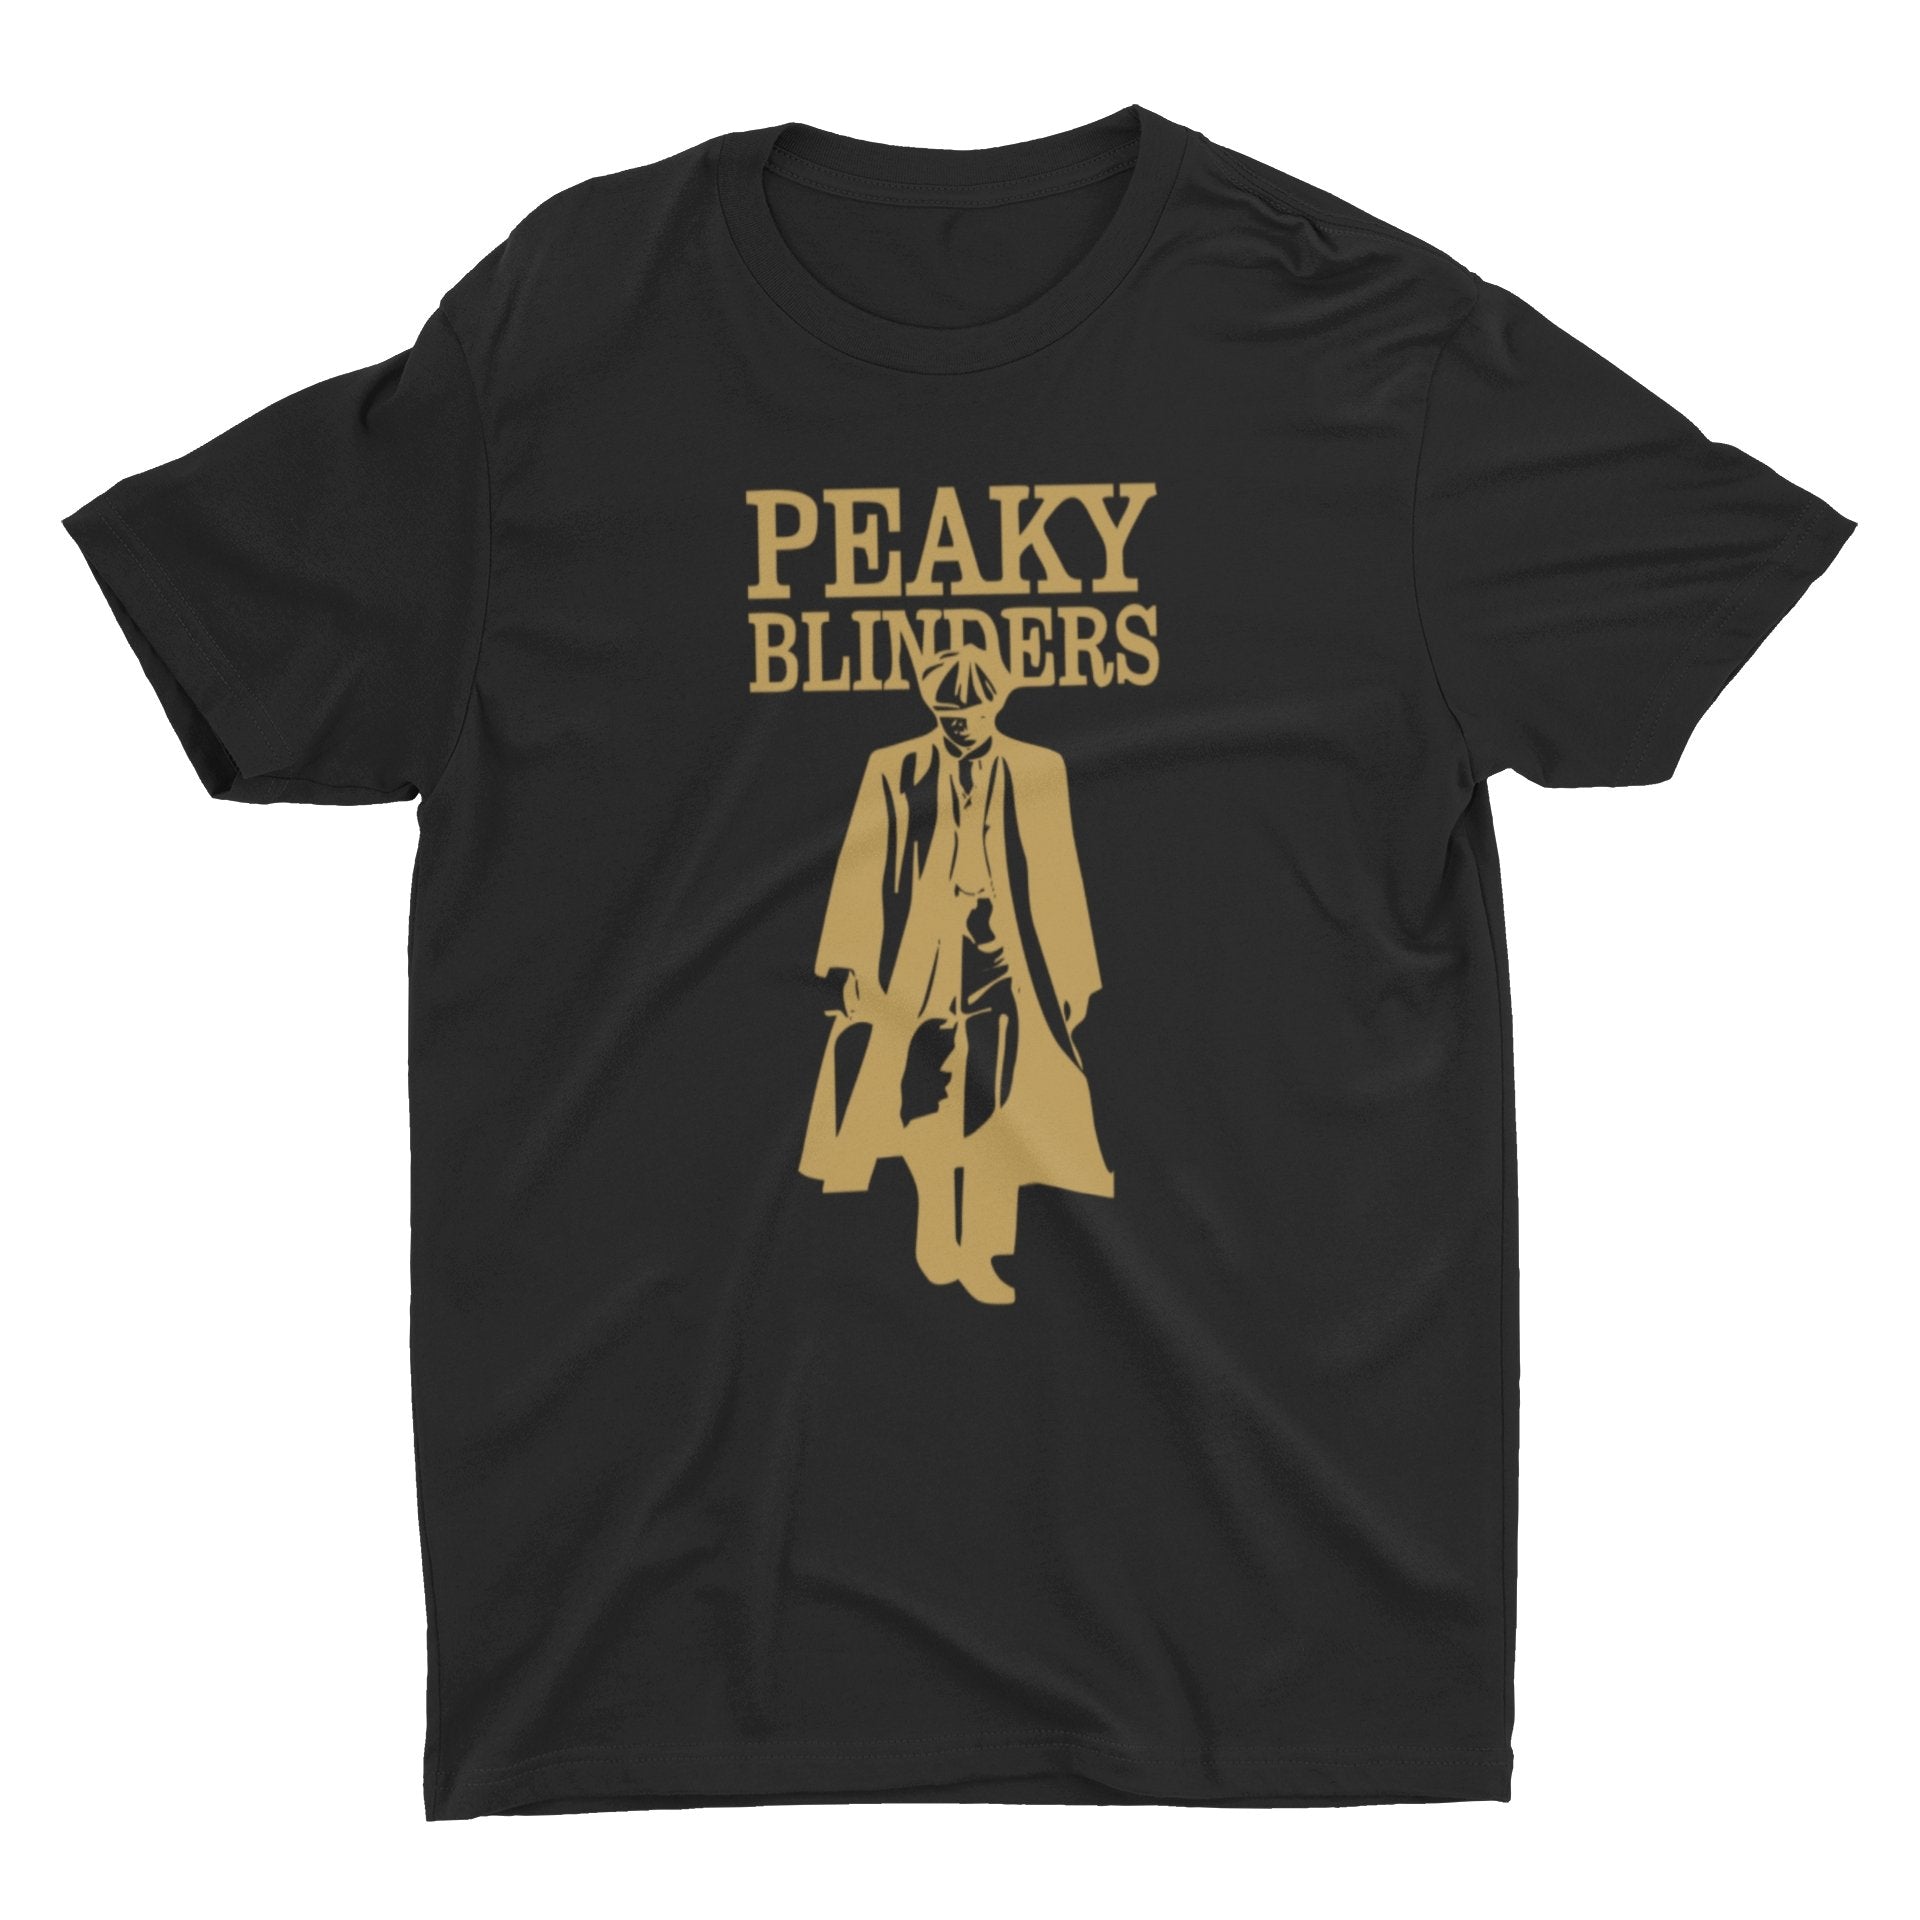 thelegalgang,Peaky Blinders  Graphic T shirt for Men,.